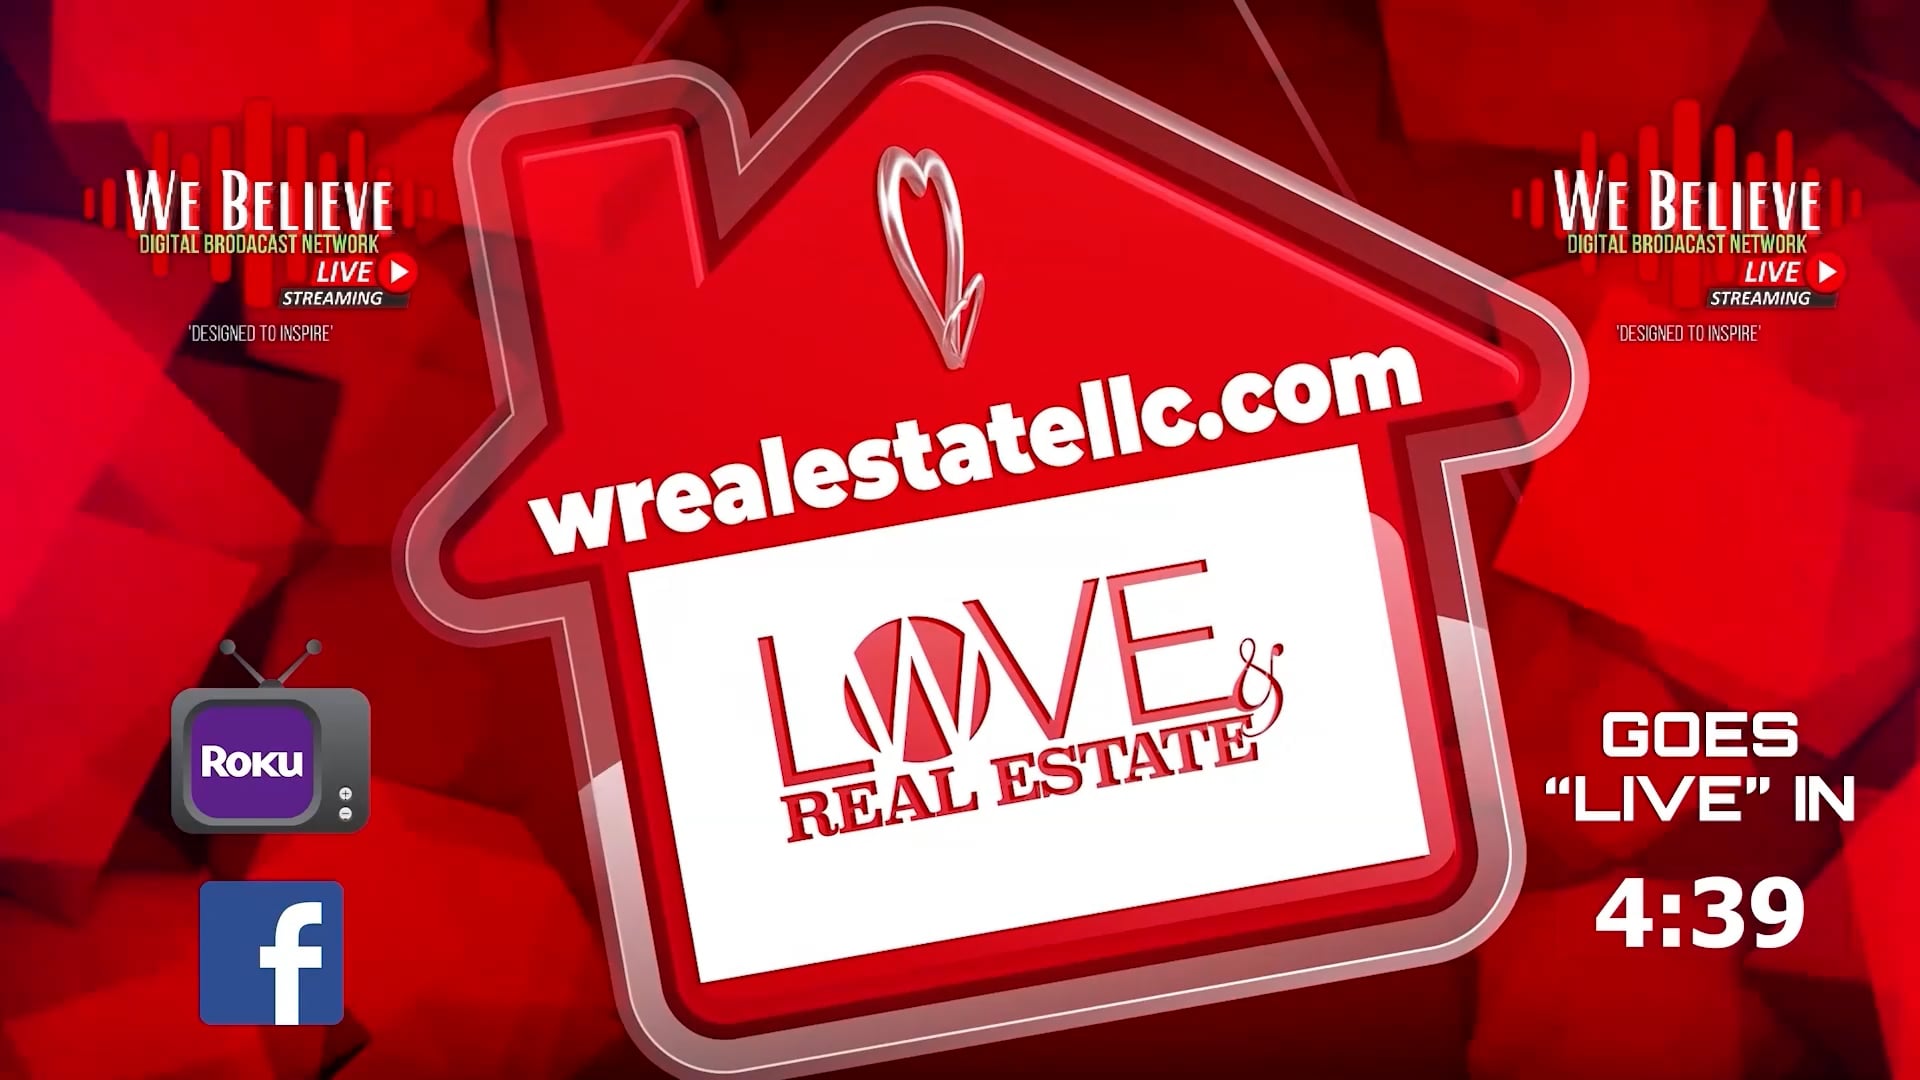 LOVE & REAL ESTATE S1-E5 FIRE PROOFING YOUR MARRIAGE- 9.14.21